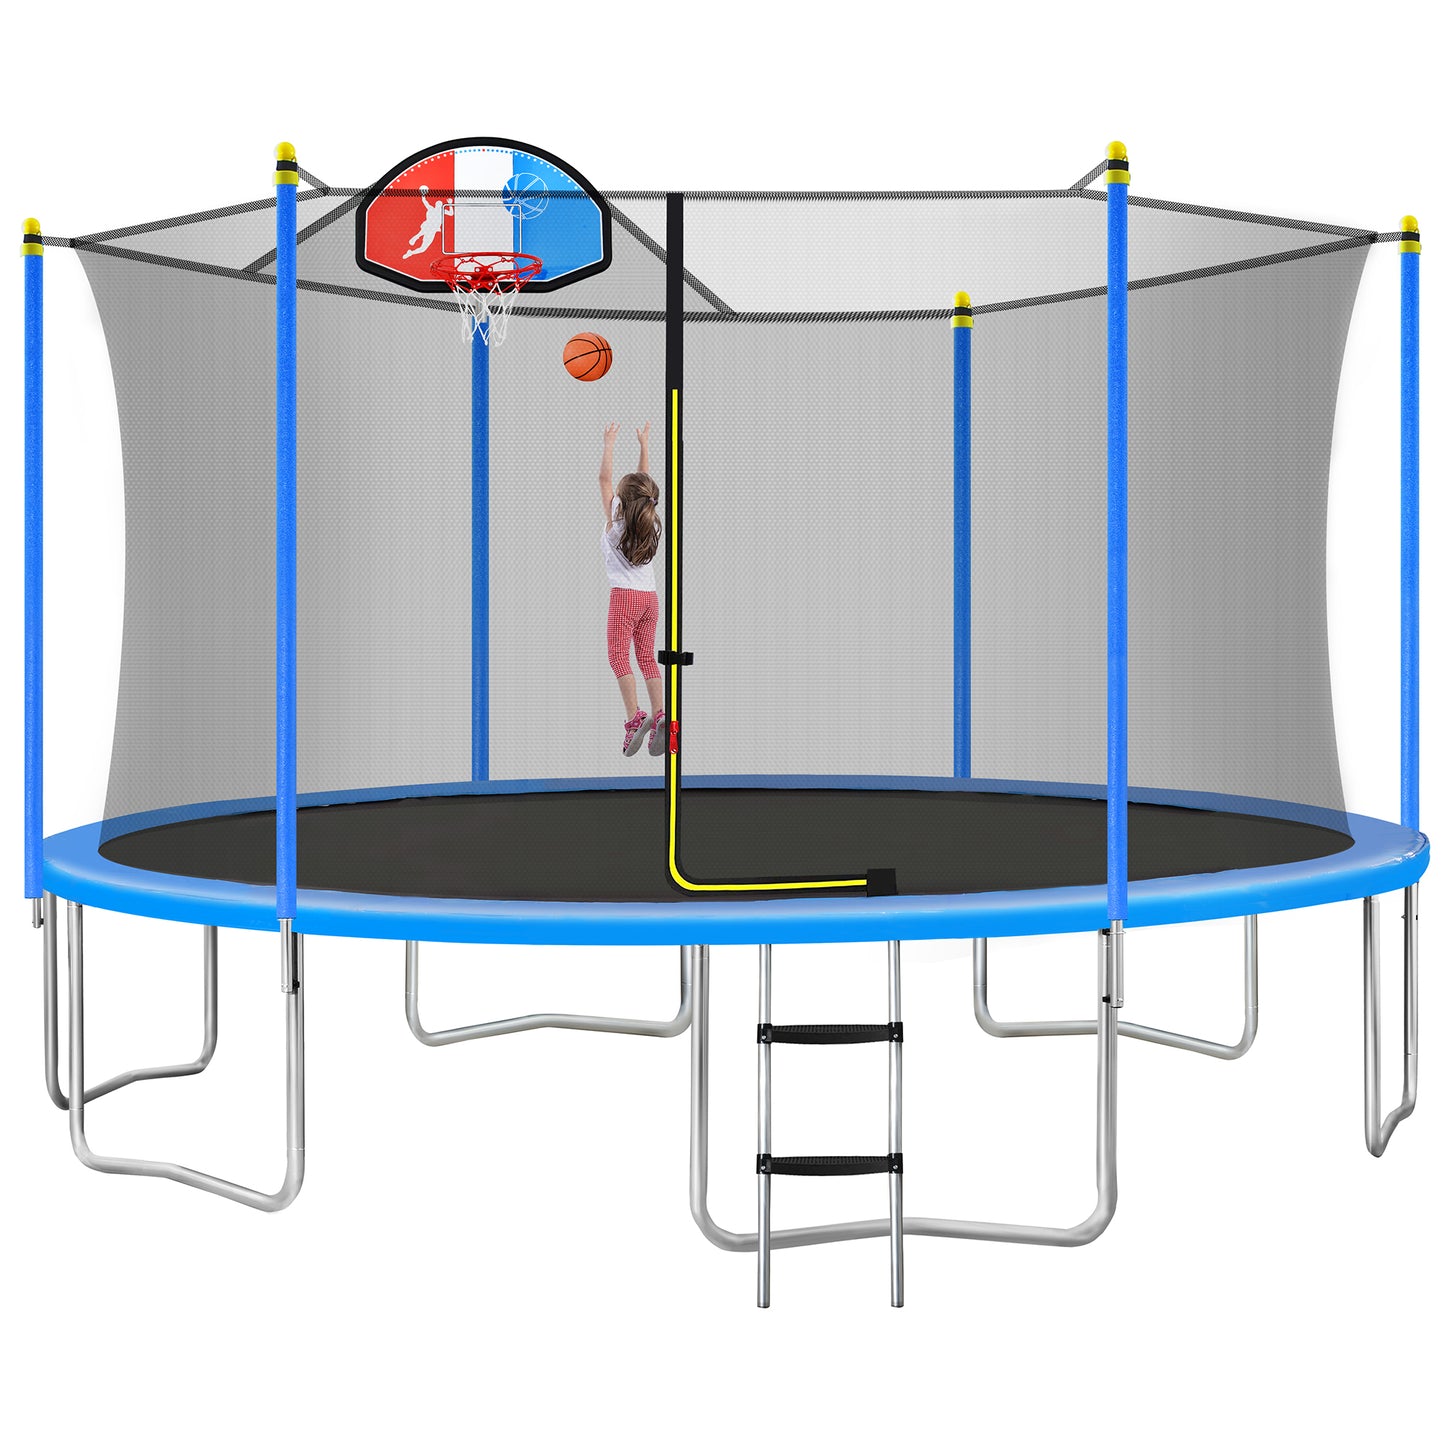 15FT Trampoline for Kids with Safety Enclosure Net, Basketball Hoop and Ladder, Easy Assembly Round Outdoor Recreational Trampoline